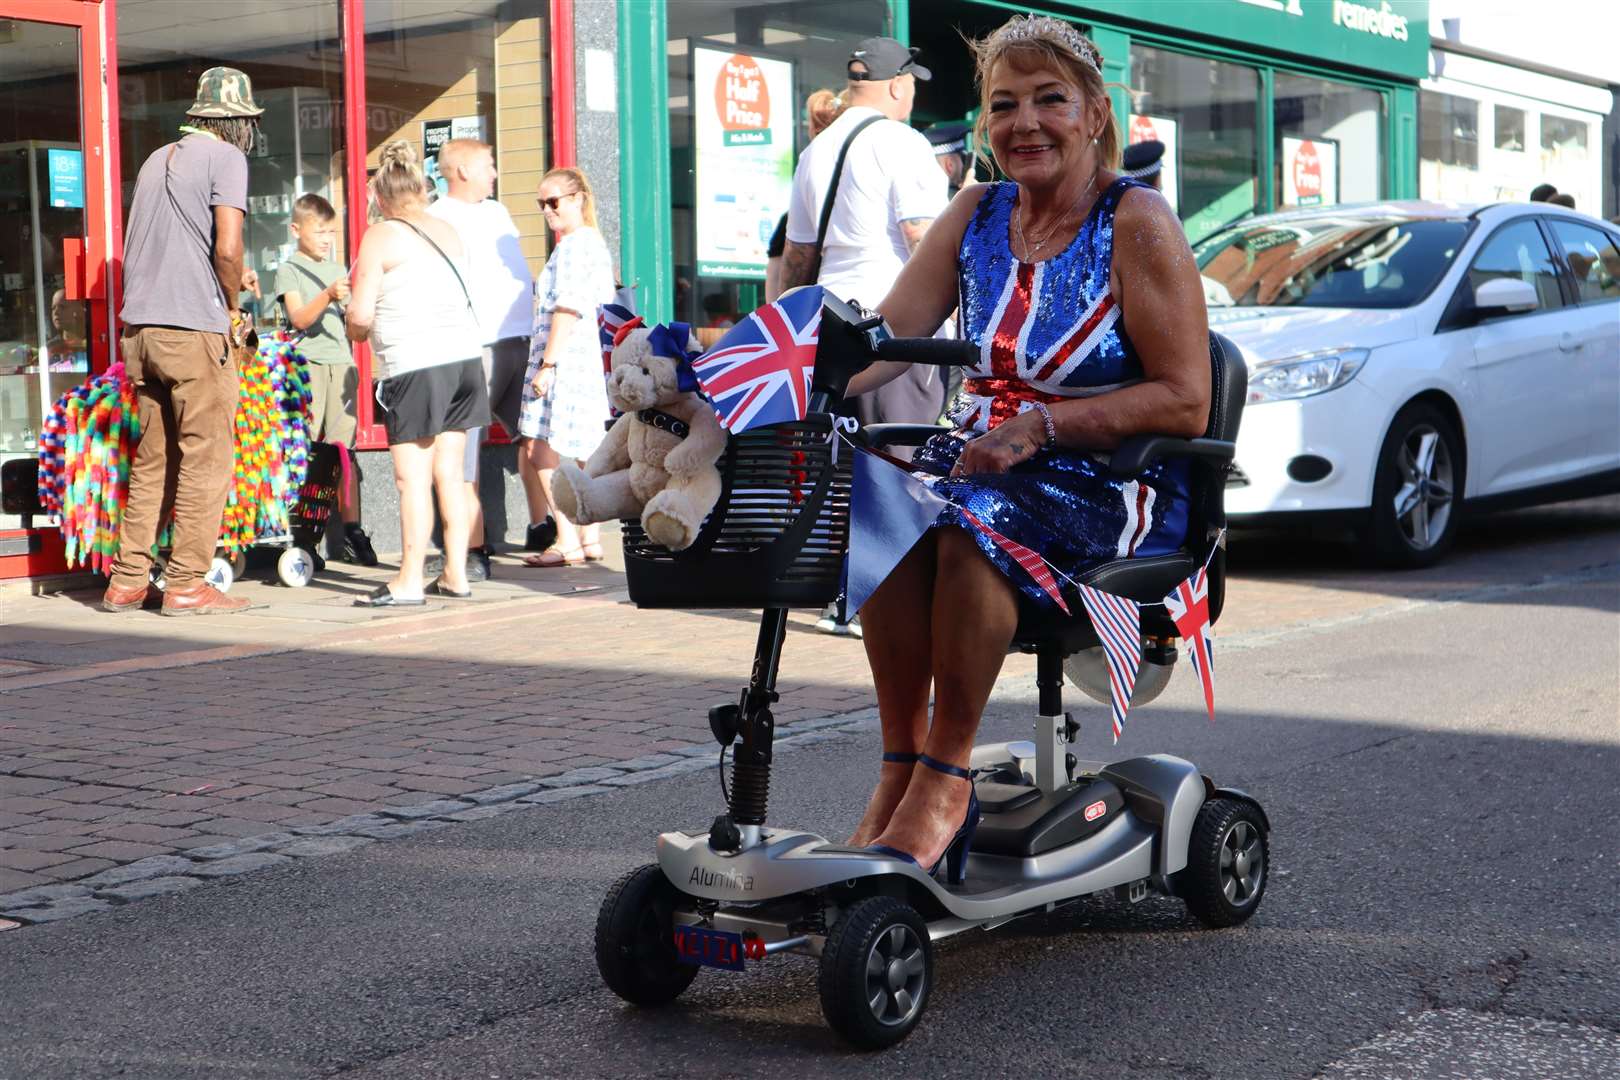 Decorated mobility scooters took to the streets for the Sheppey summer carnival in Sheerness on Saturday